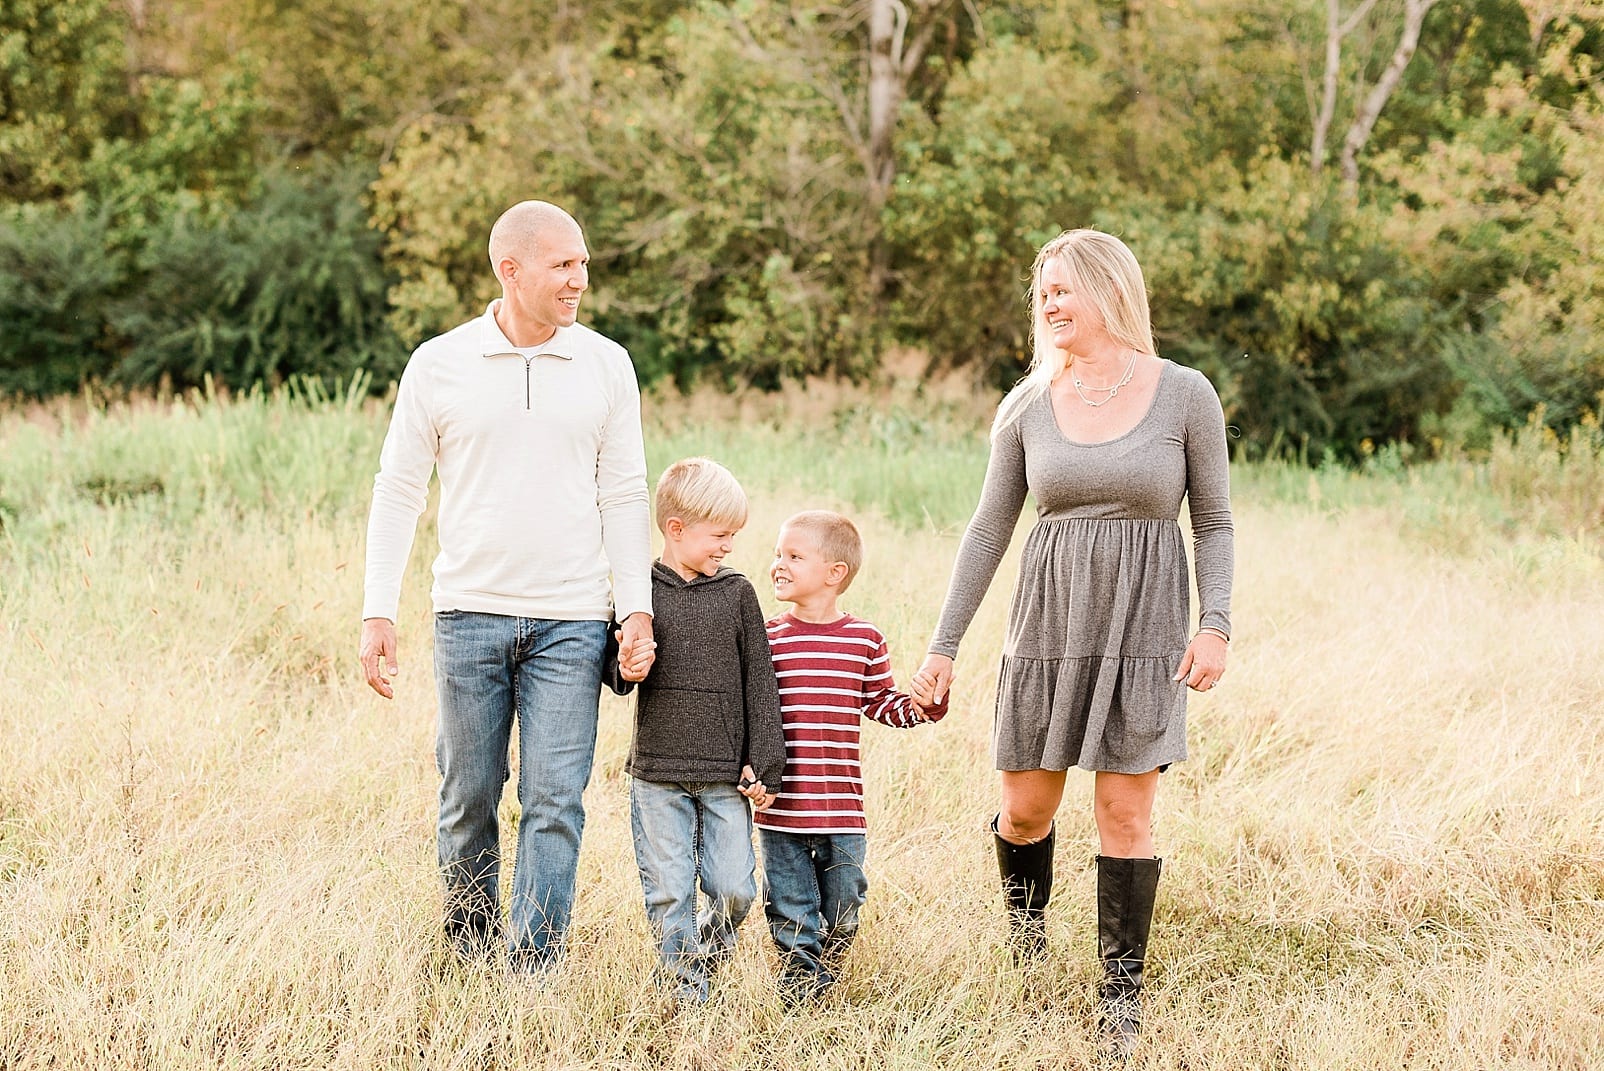 Wake forest mother and father walking and holding hands with their two young sons photo